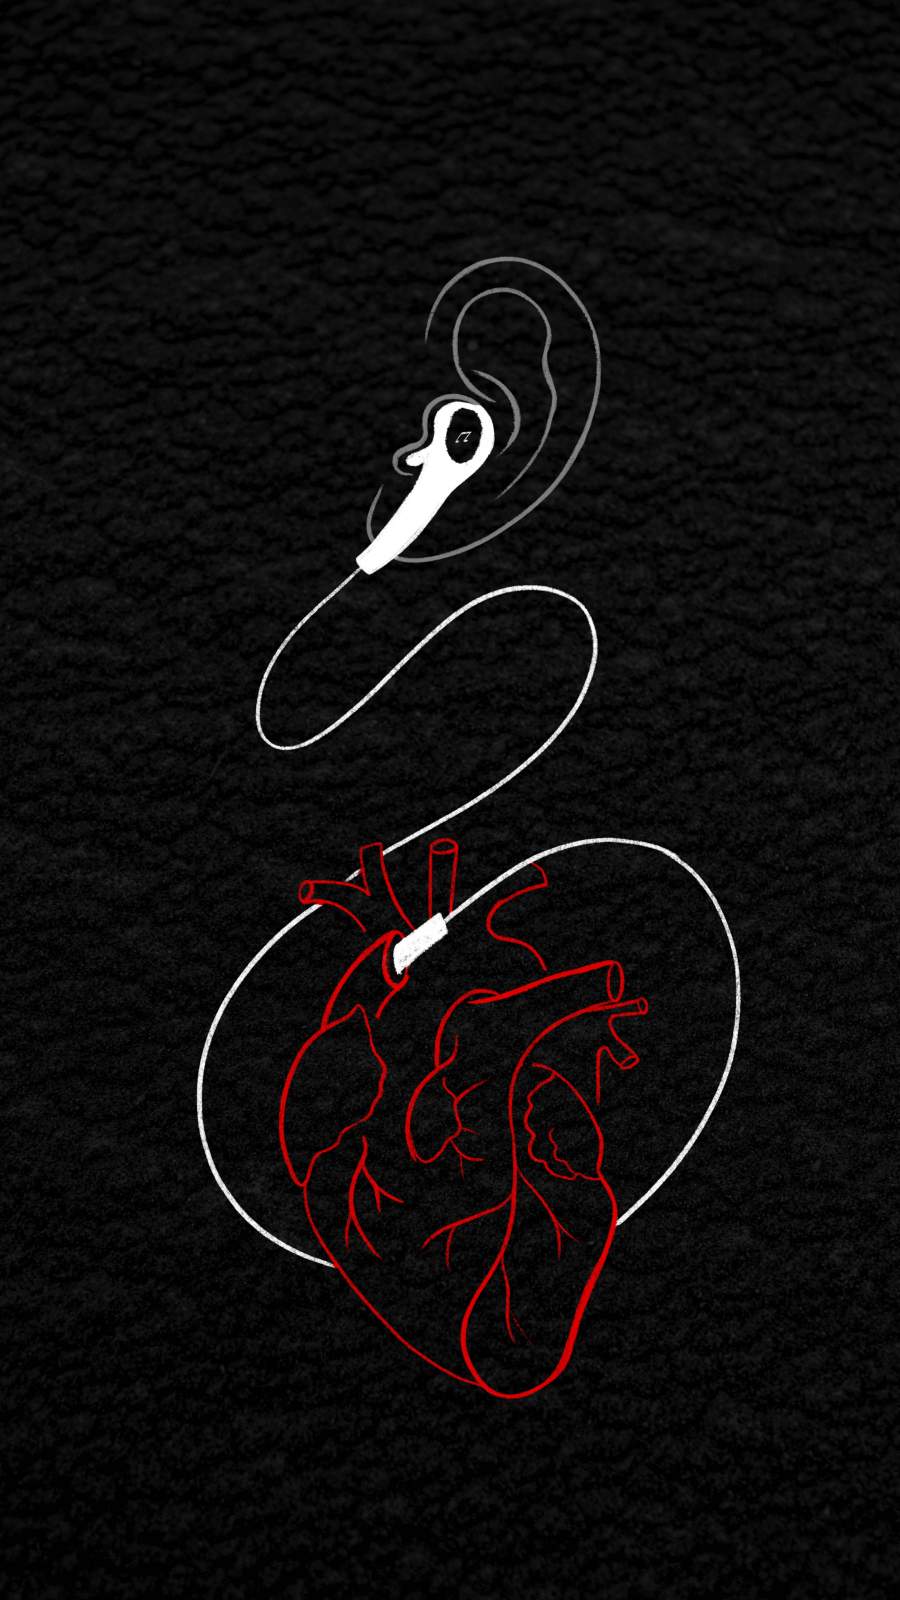 Heart And Brain IPhone Wallpaper  IPhone Wallpapers  iPhone Wallpapers